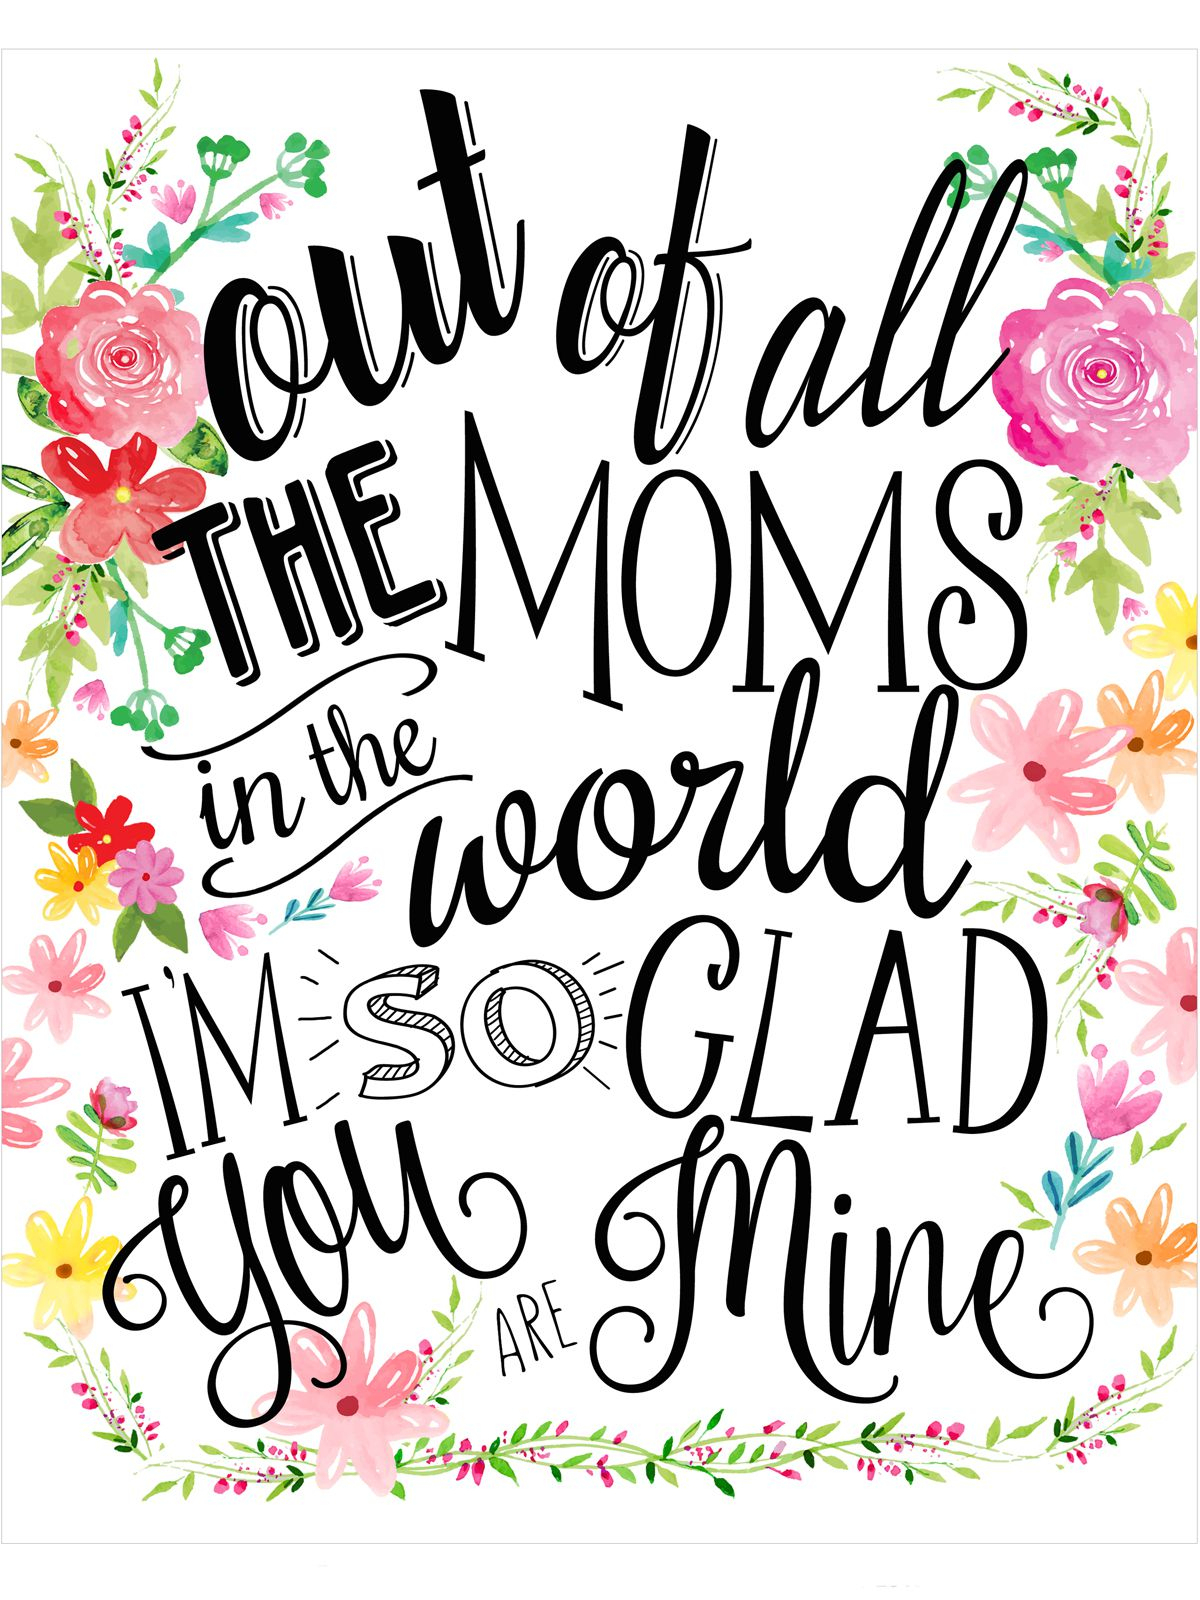 18 Mothers Day Cards - Free Printable Mother&amp;#039;s Day Cards - Make Mother Day Card Online Free Printable